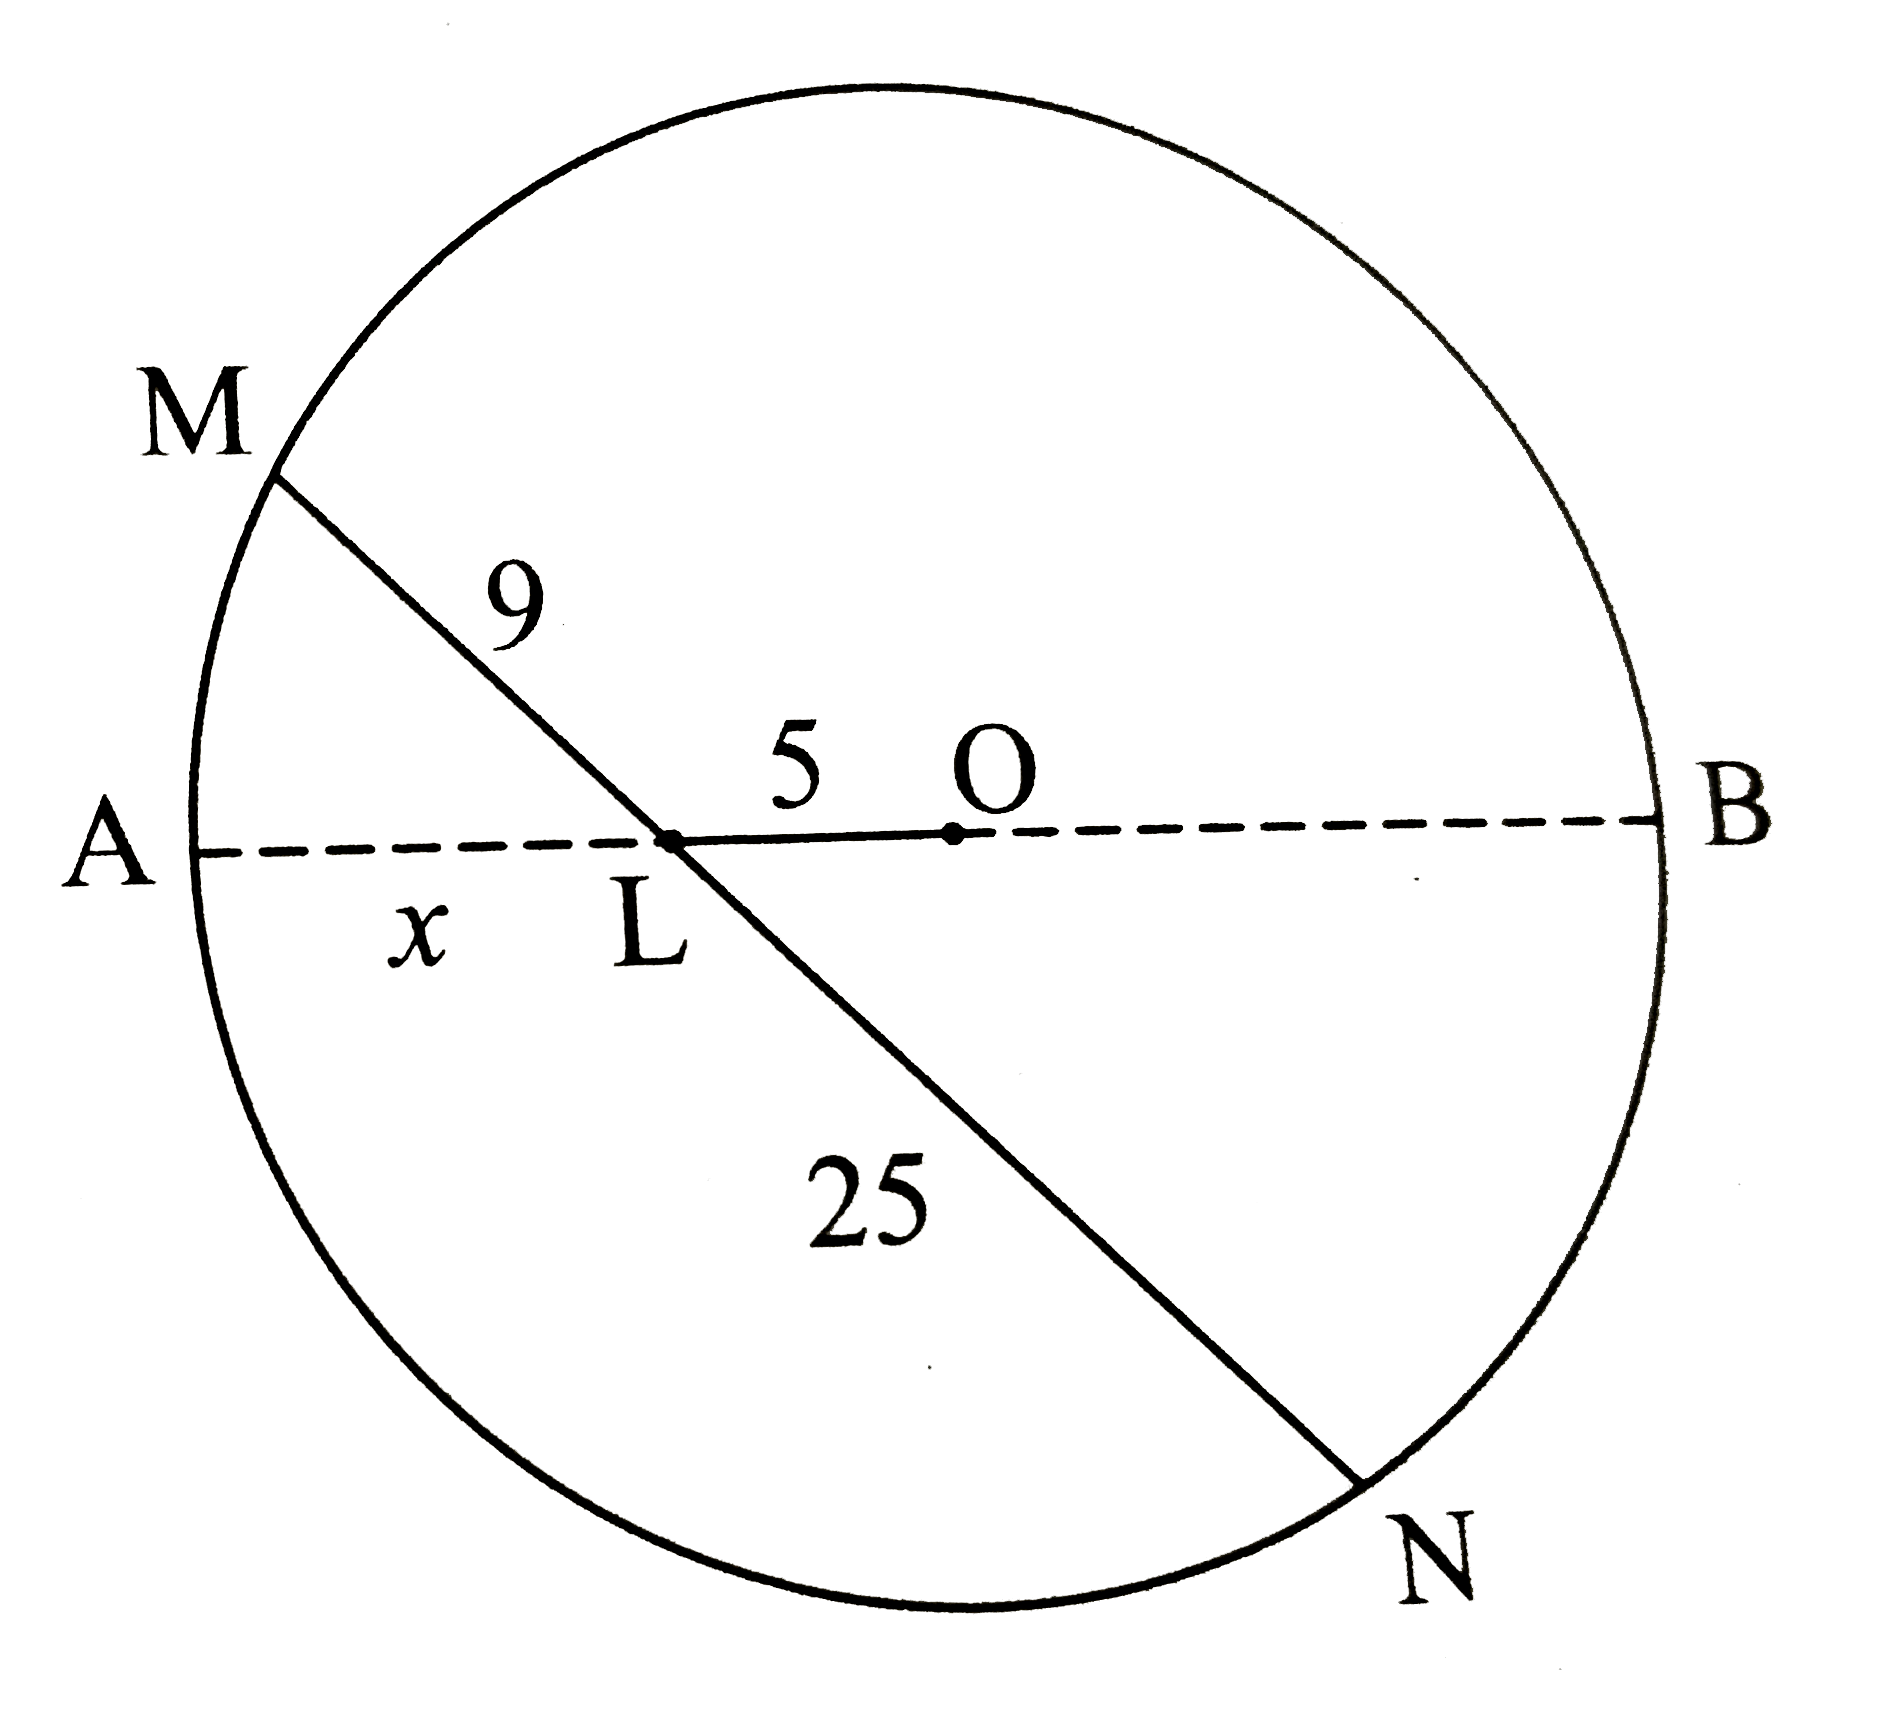 In the figure, seg MN is a chord of a circle with centre O. MN = 15, L is a point on  chord MN such that ML  = 9  and d( O, L )  = 5. Find the radius of the circle.